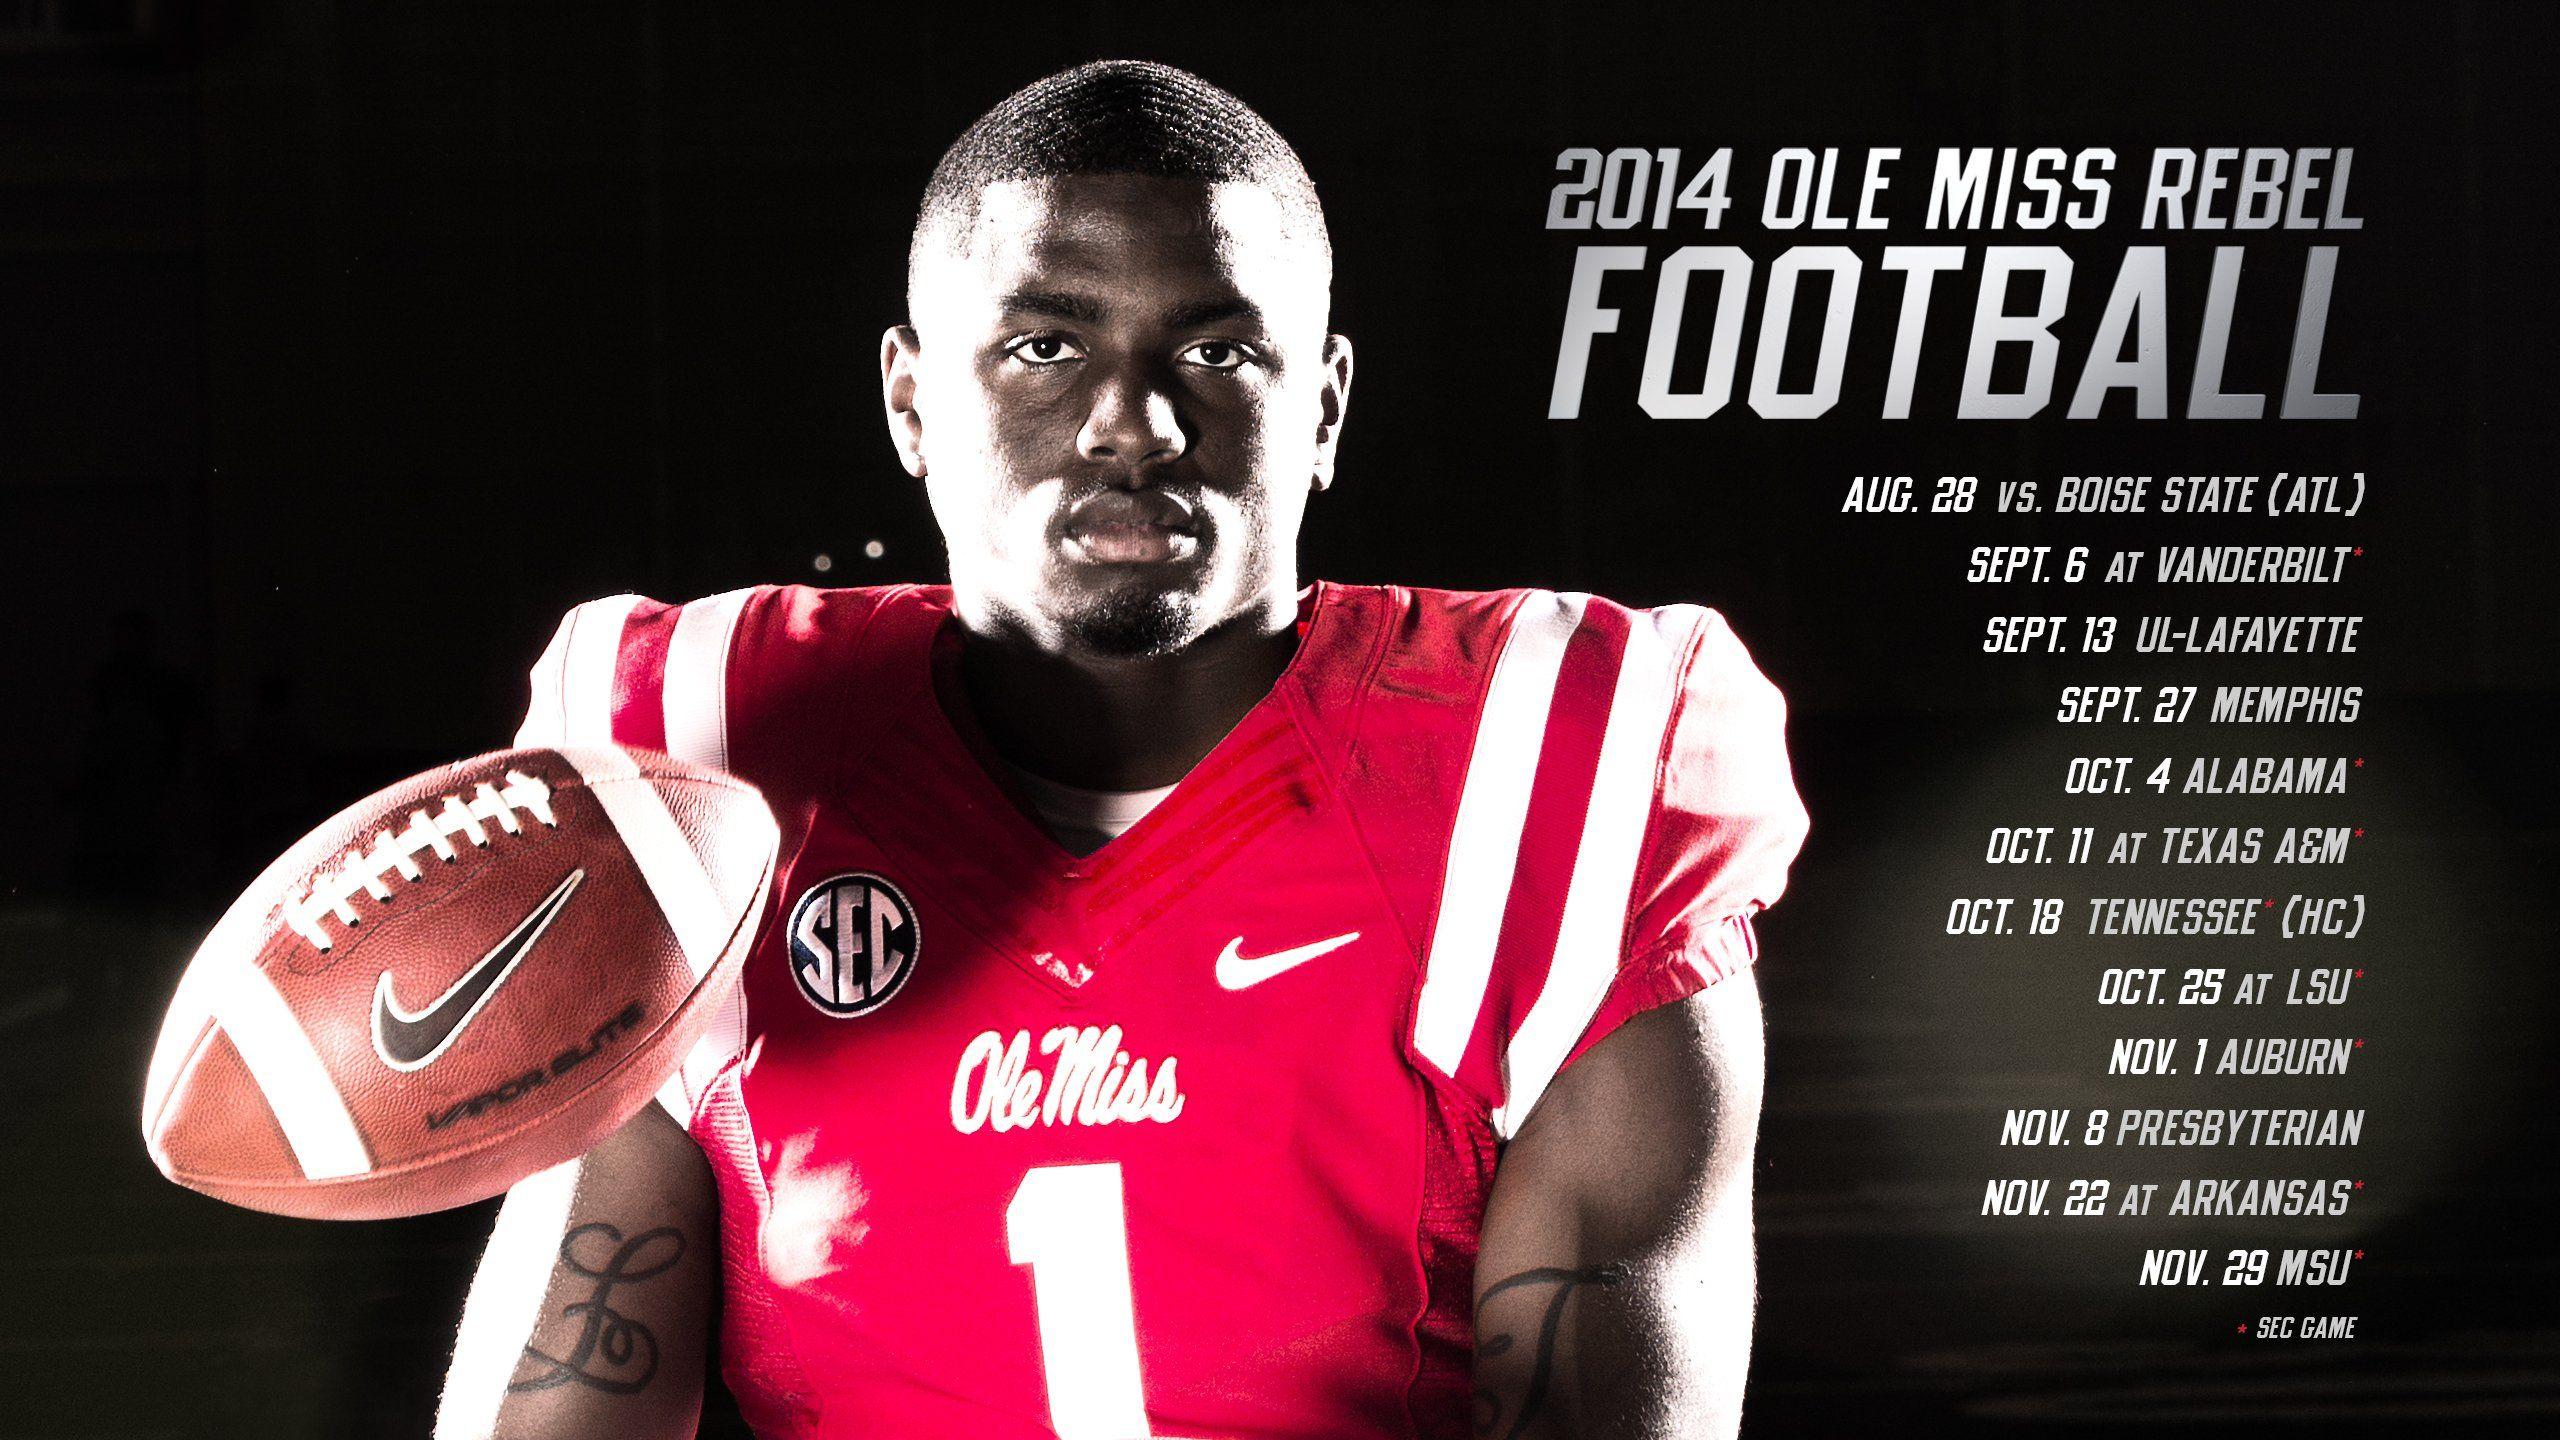 OLE MISS REBELS college football mississippi olemiss wallpapers.